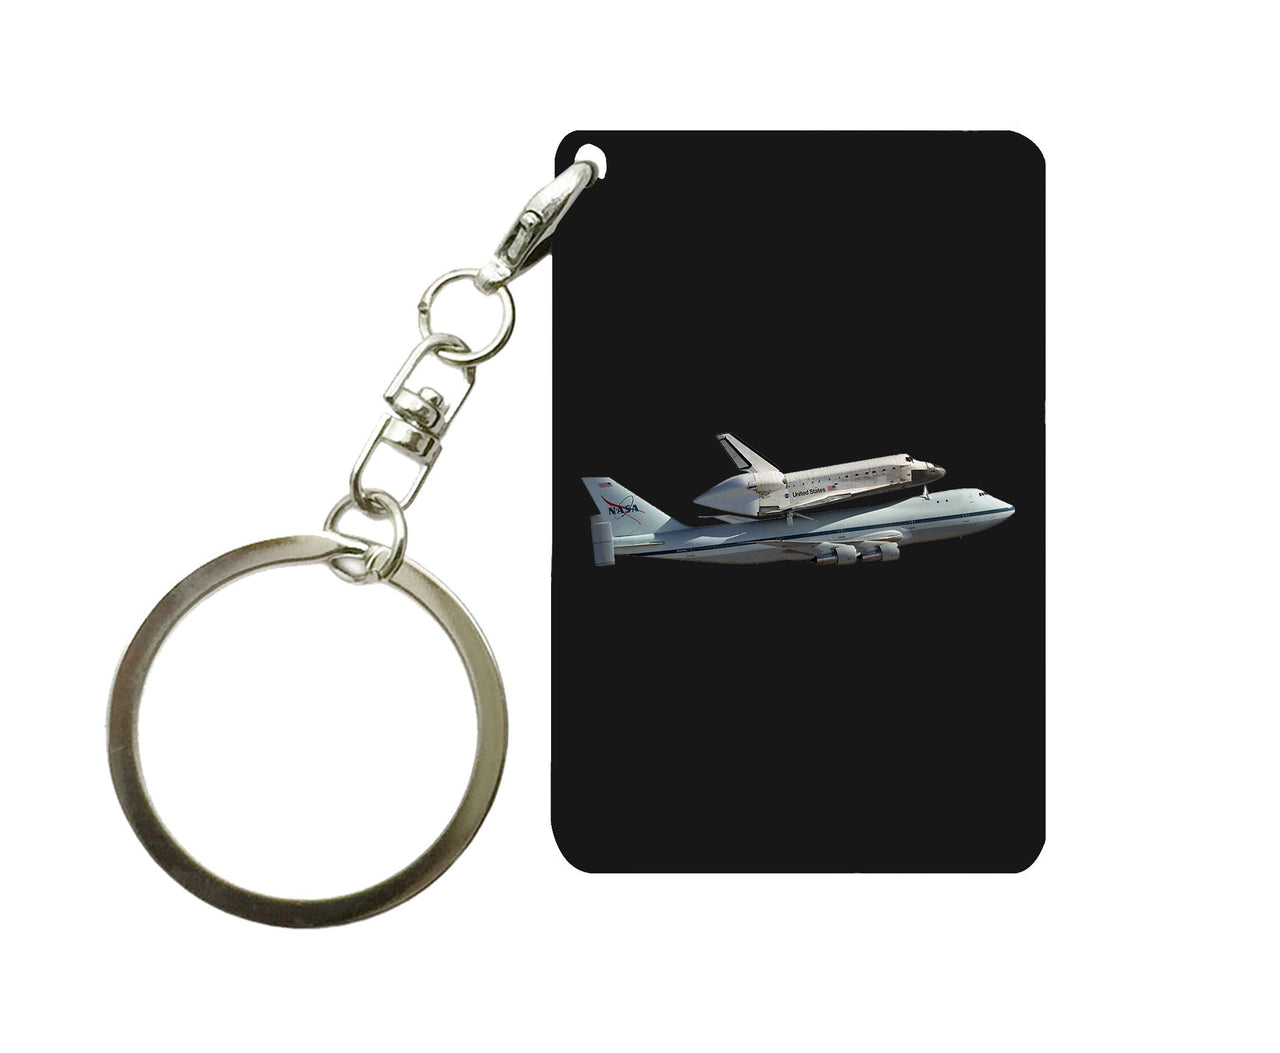 Space shuttle on 747 Designed Key Chains